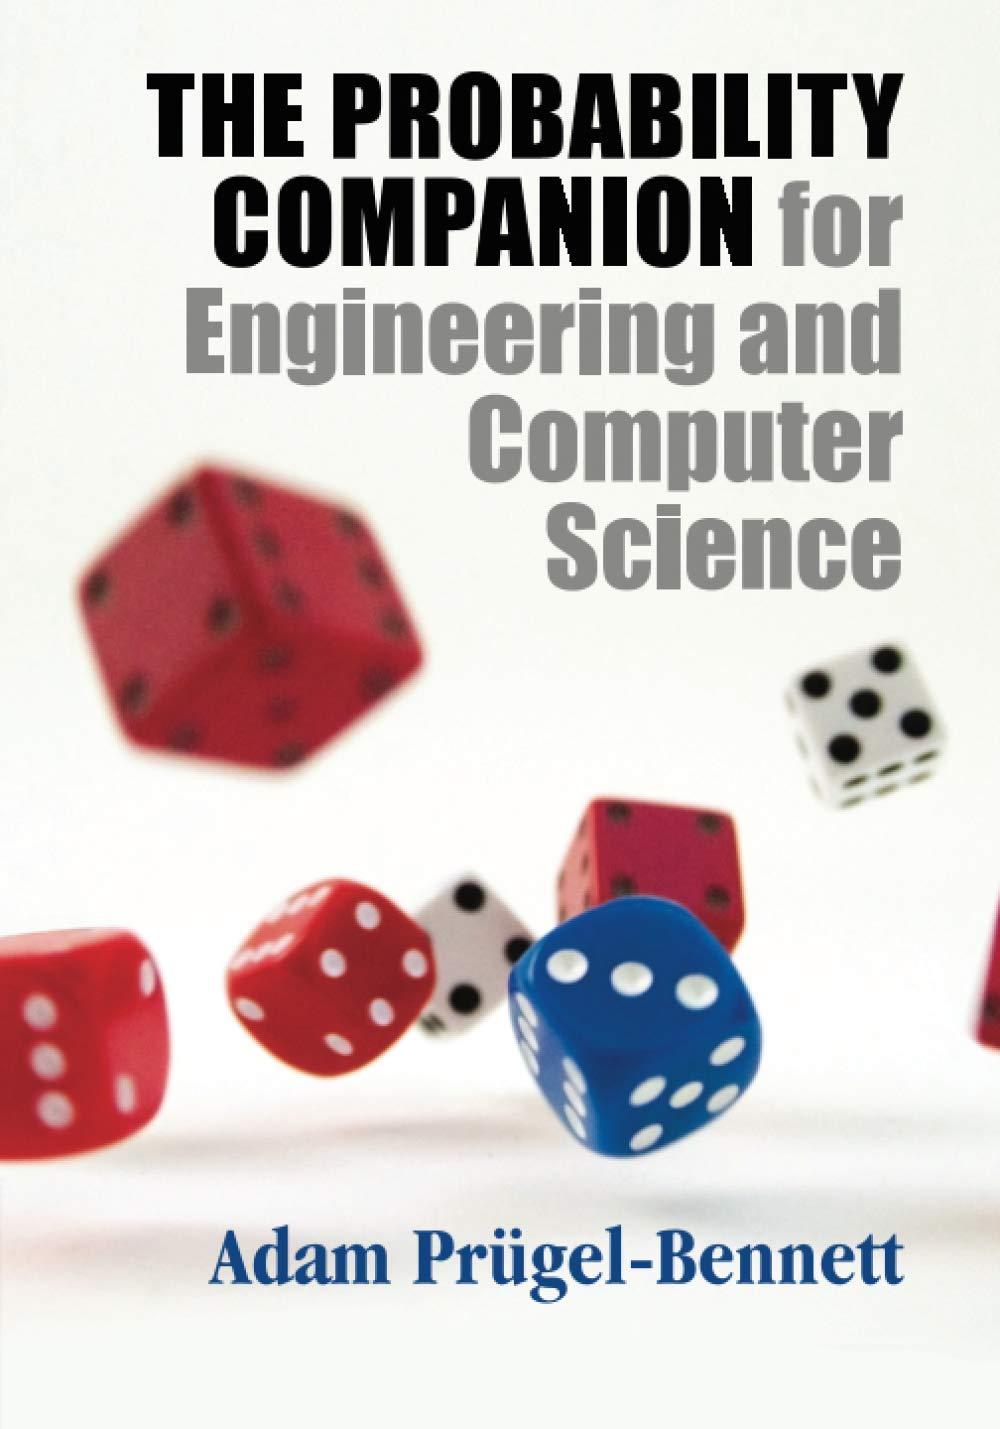 the probability companion for engineering and computer science 1st edition adam prügel-bennett 1108727700,